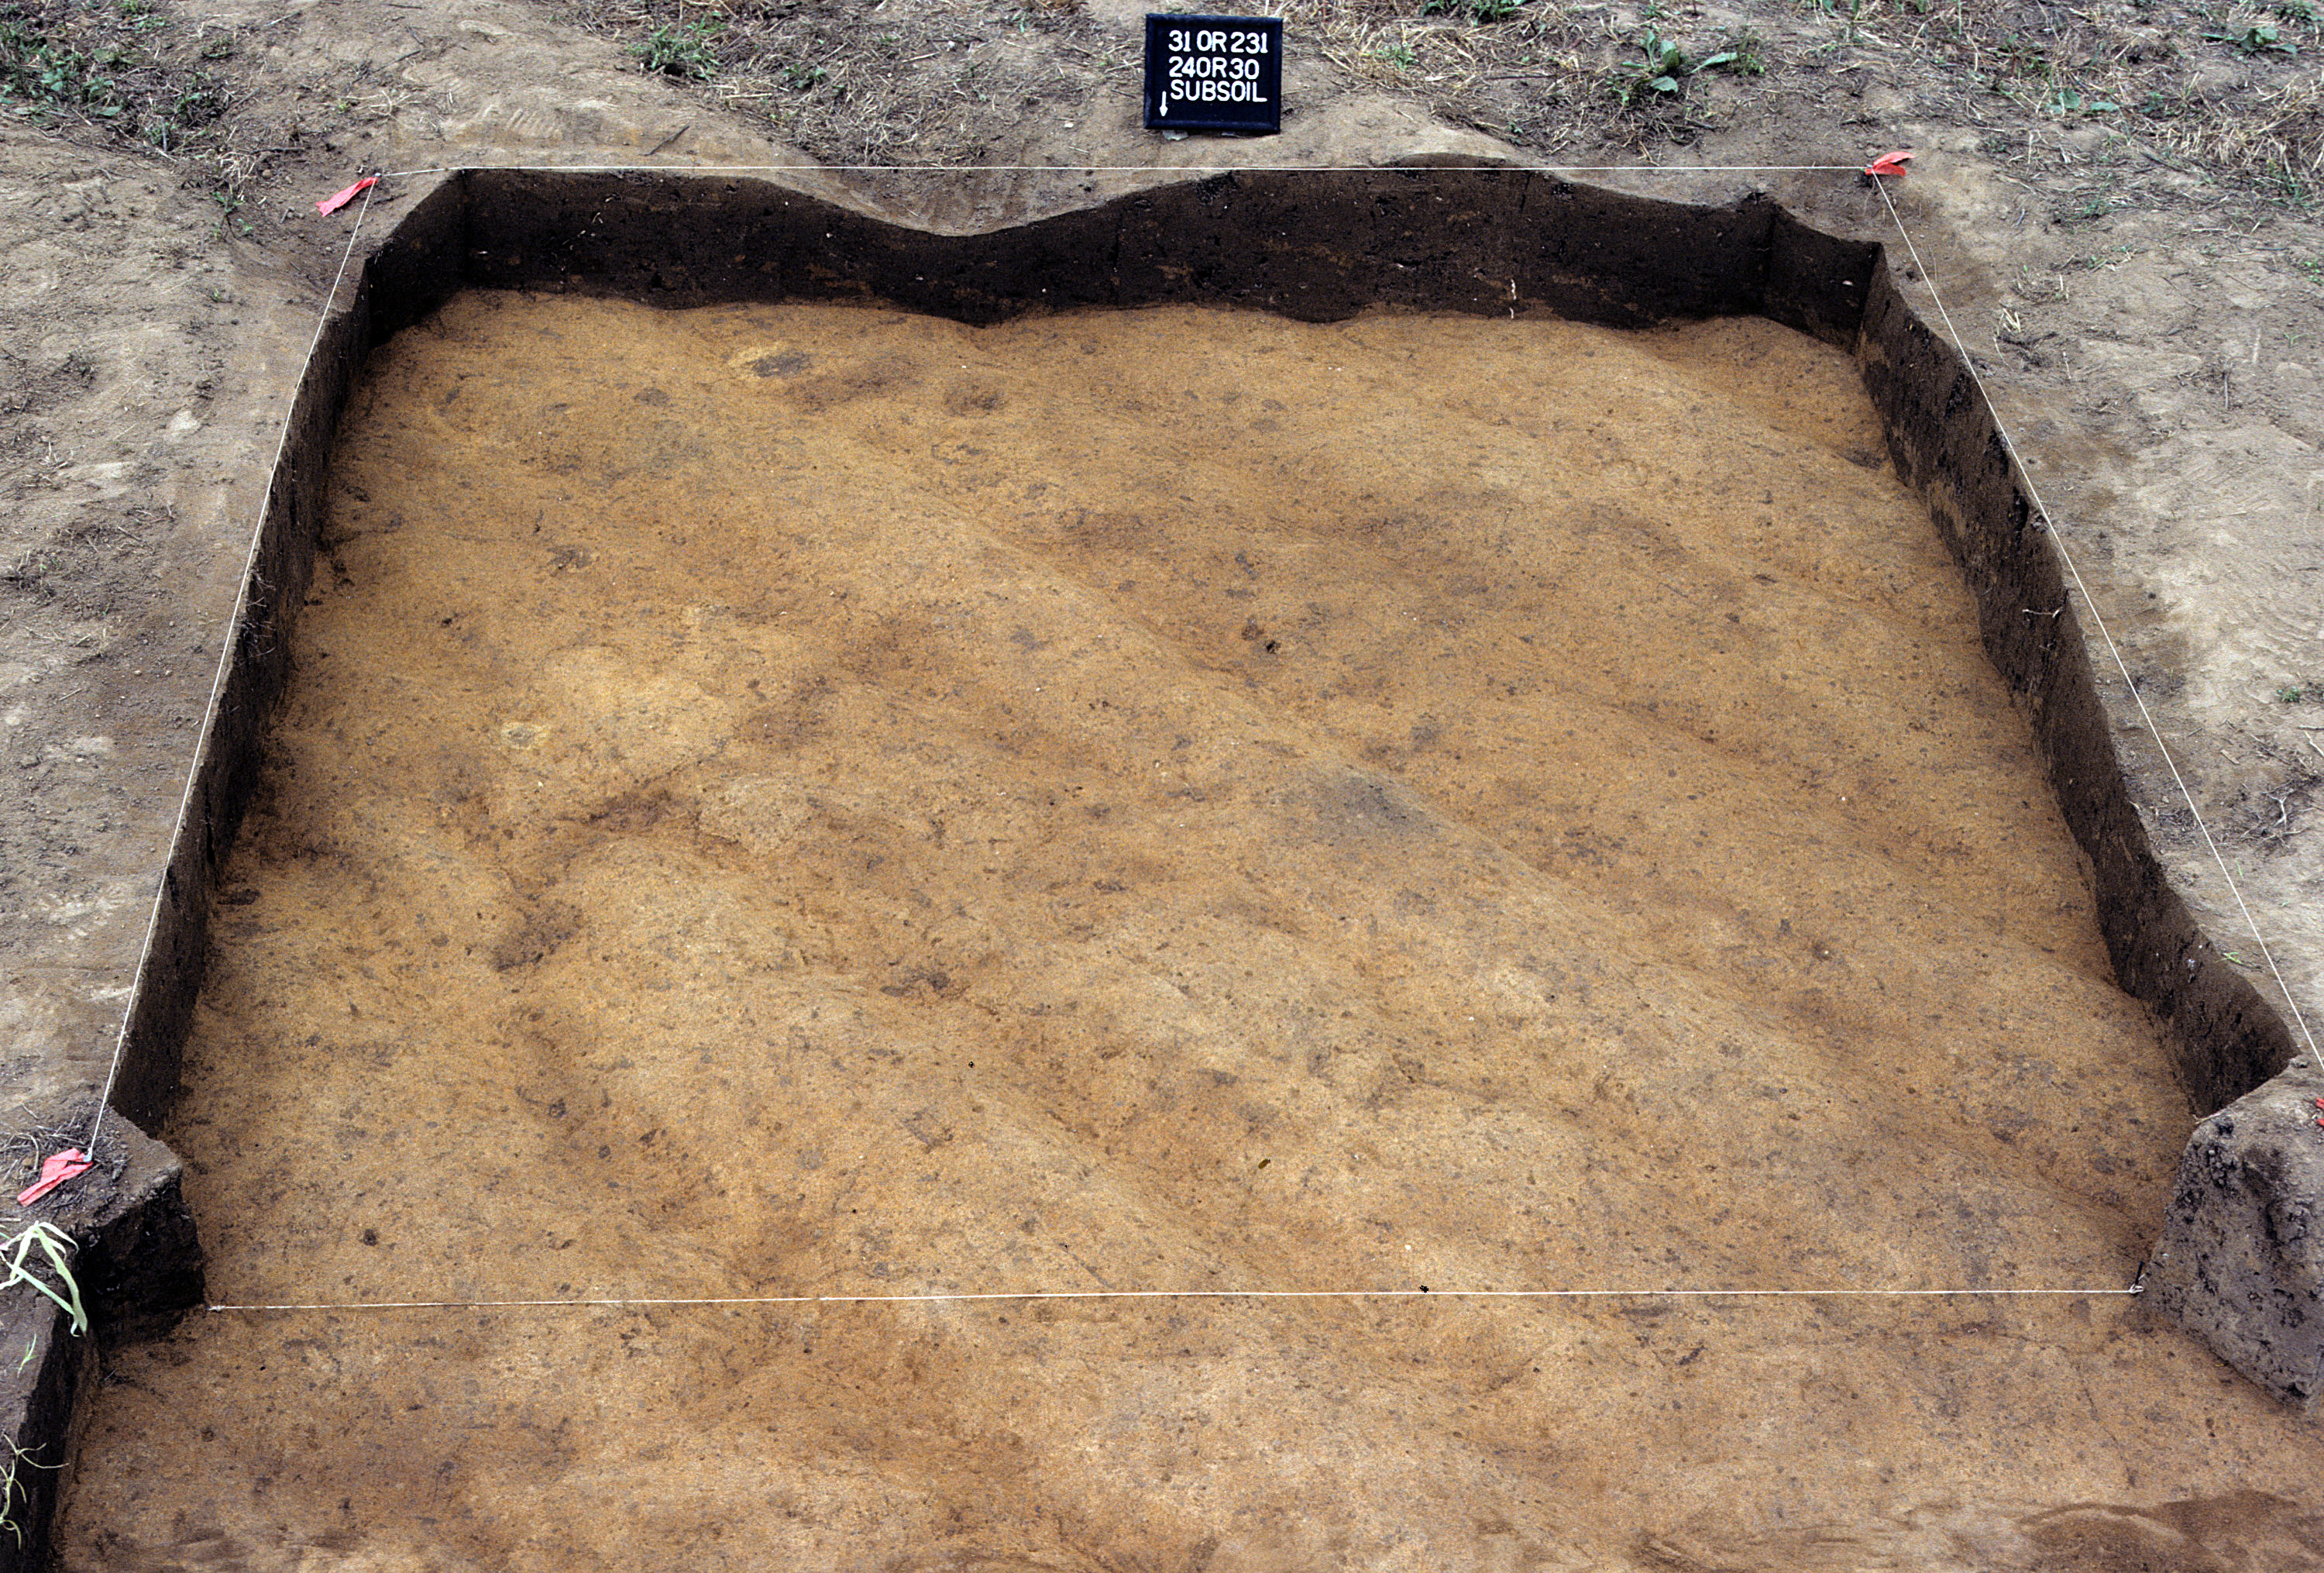 Figure 853. Sq. 240R30 at top of subsoil (view to south).